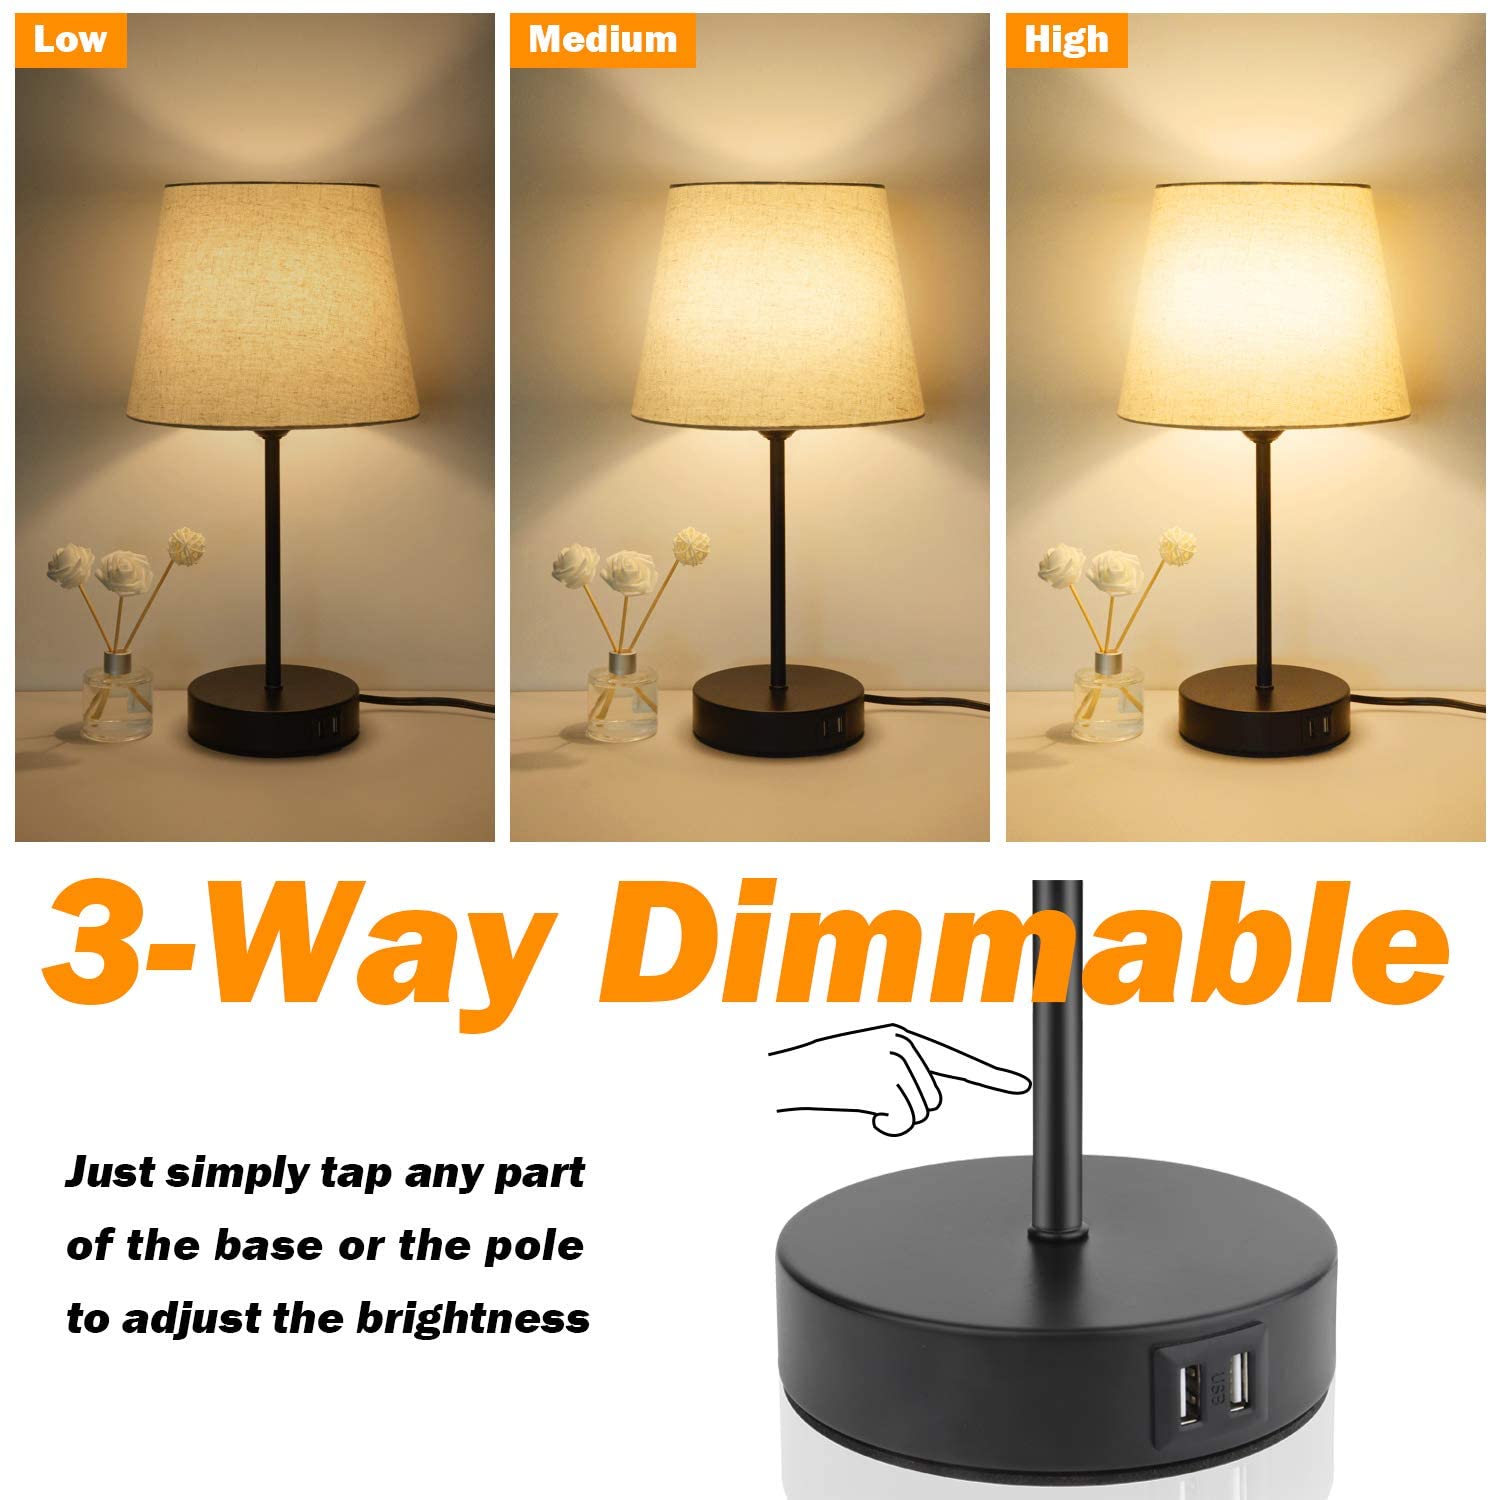 2-Count Bosceos 3-Way Touch Control Dimmable Table Lamps w/ 2 USB Ports & Led Bulbs $35 + free s/h at Amazon